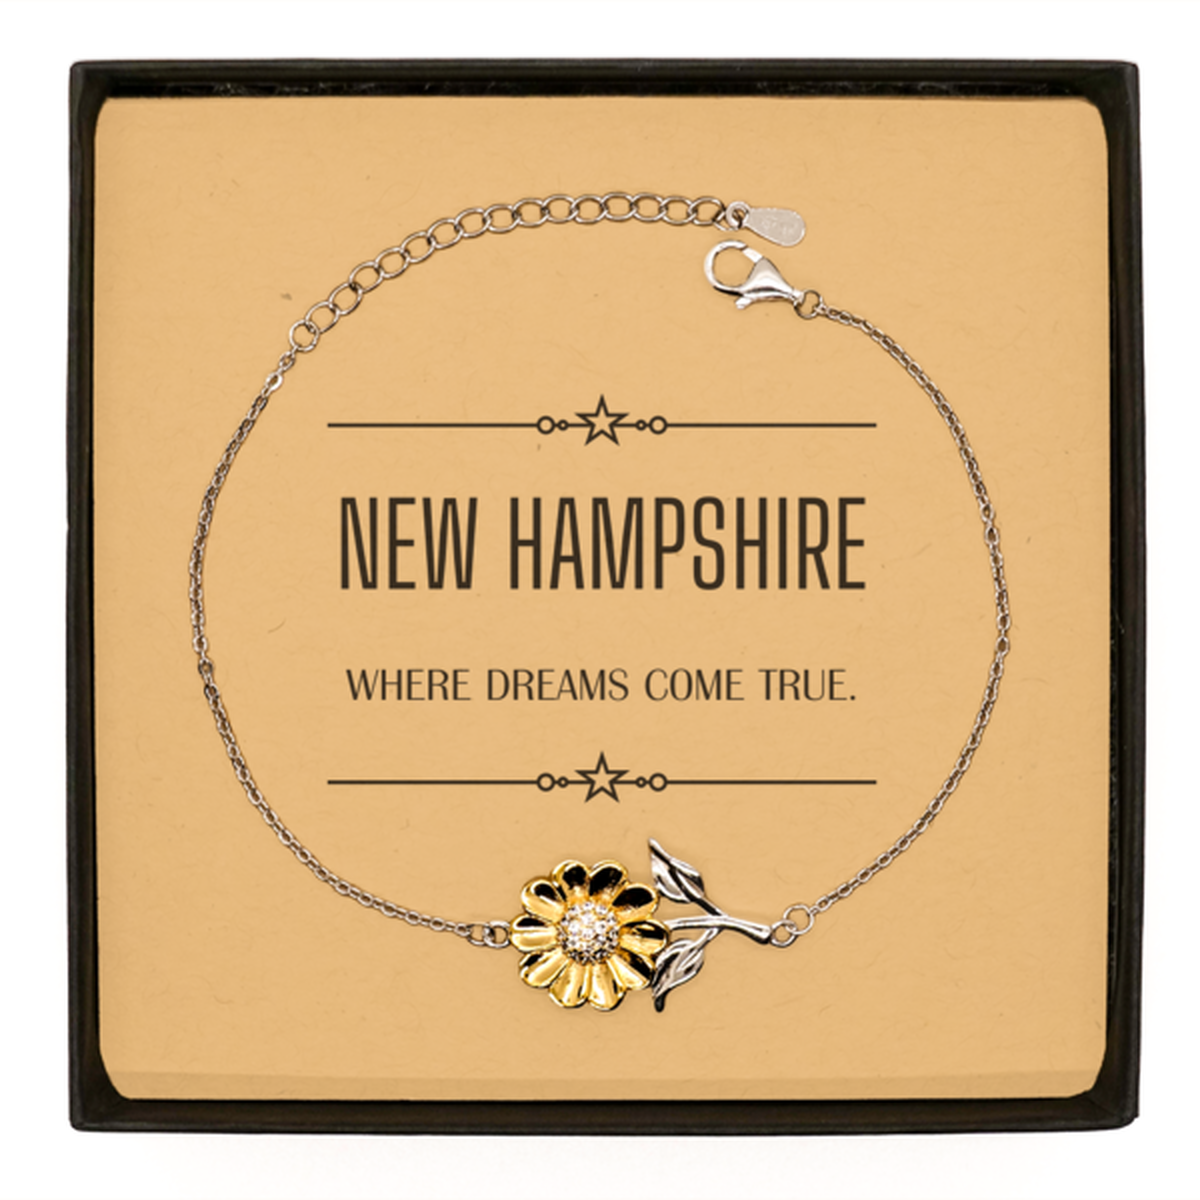 Love New Hampshire State Sunflower Bracelet, New Hampshire Where dreams come true, Birthday Inspirational Gifts For New Hampshire Men, Women, Friends